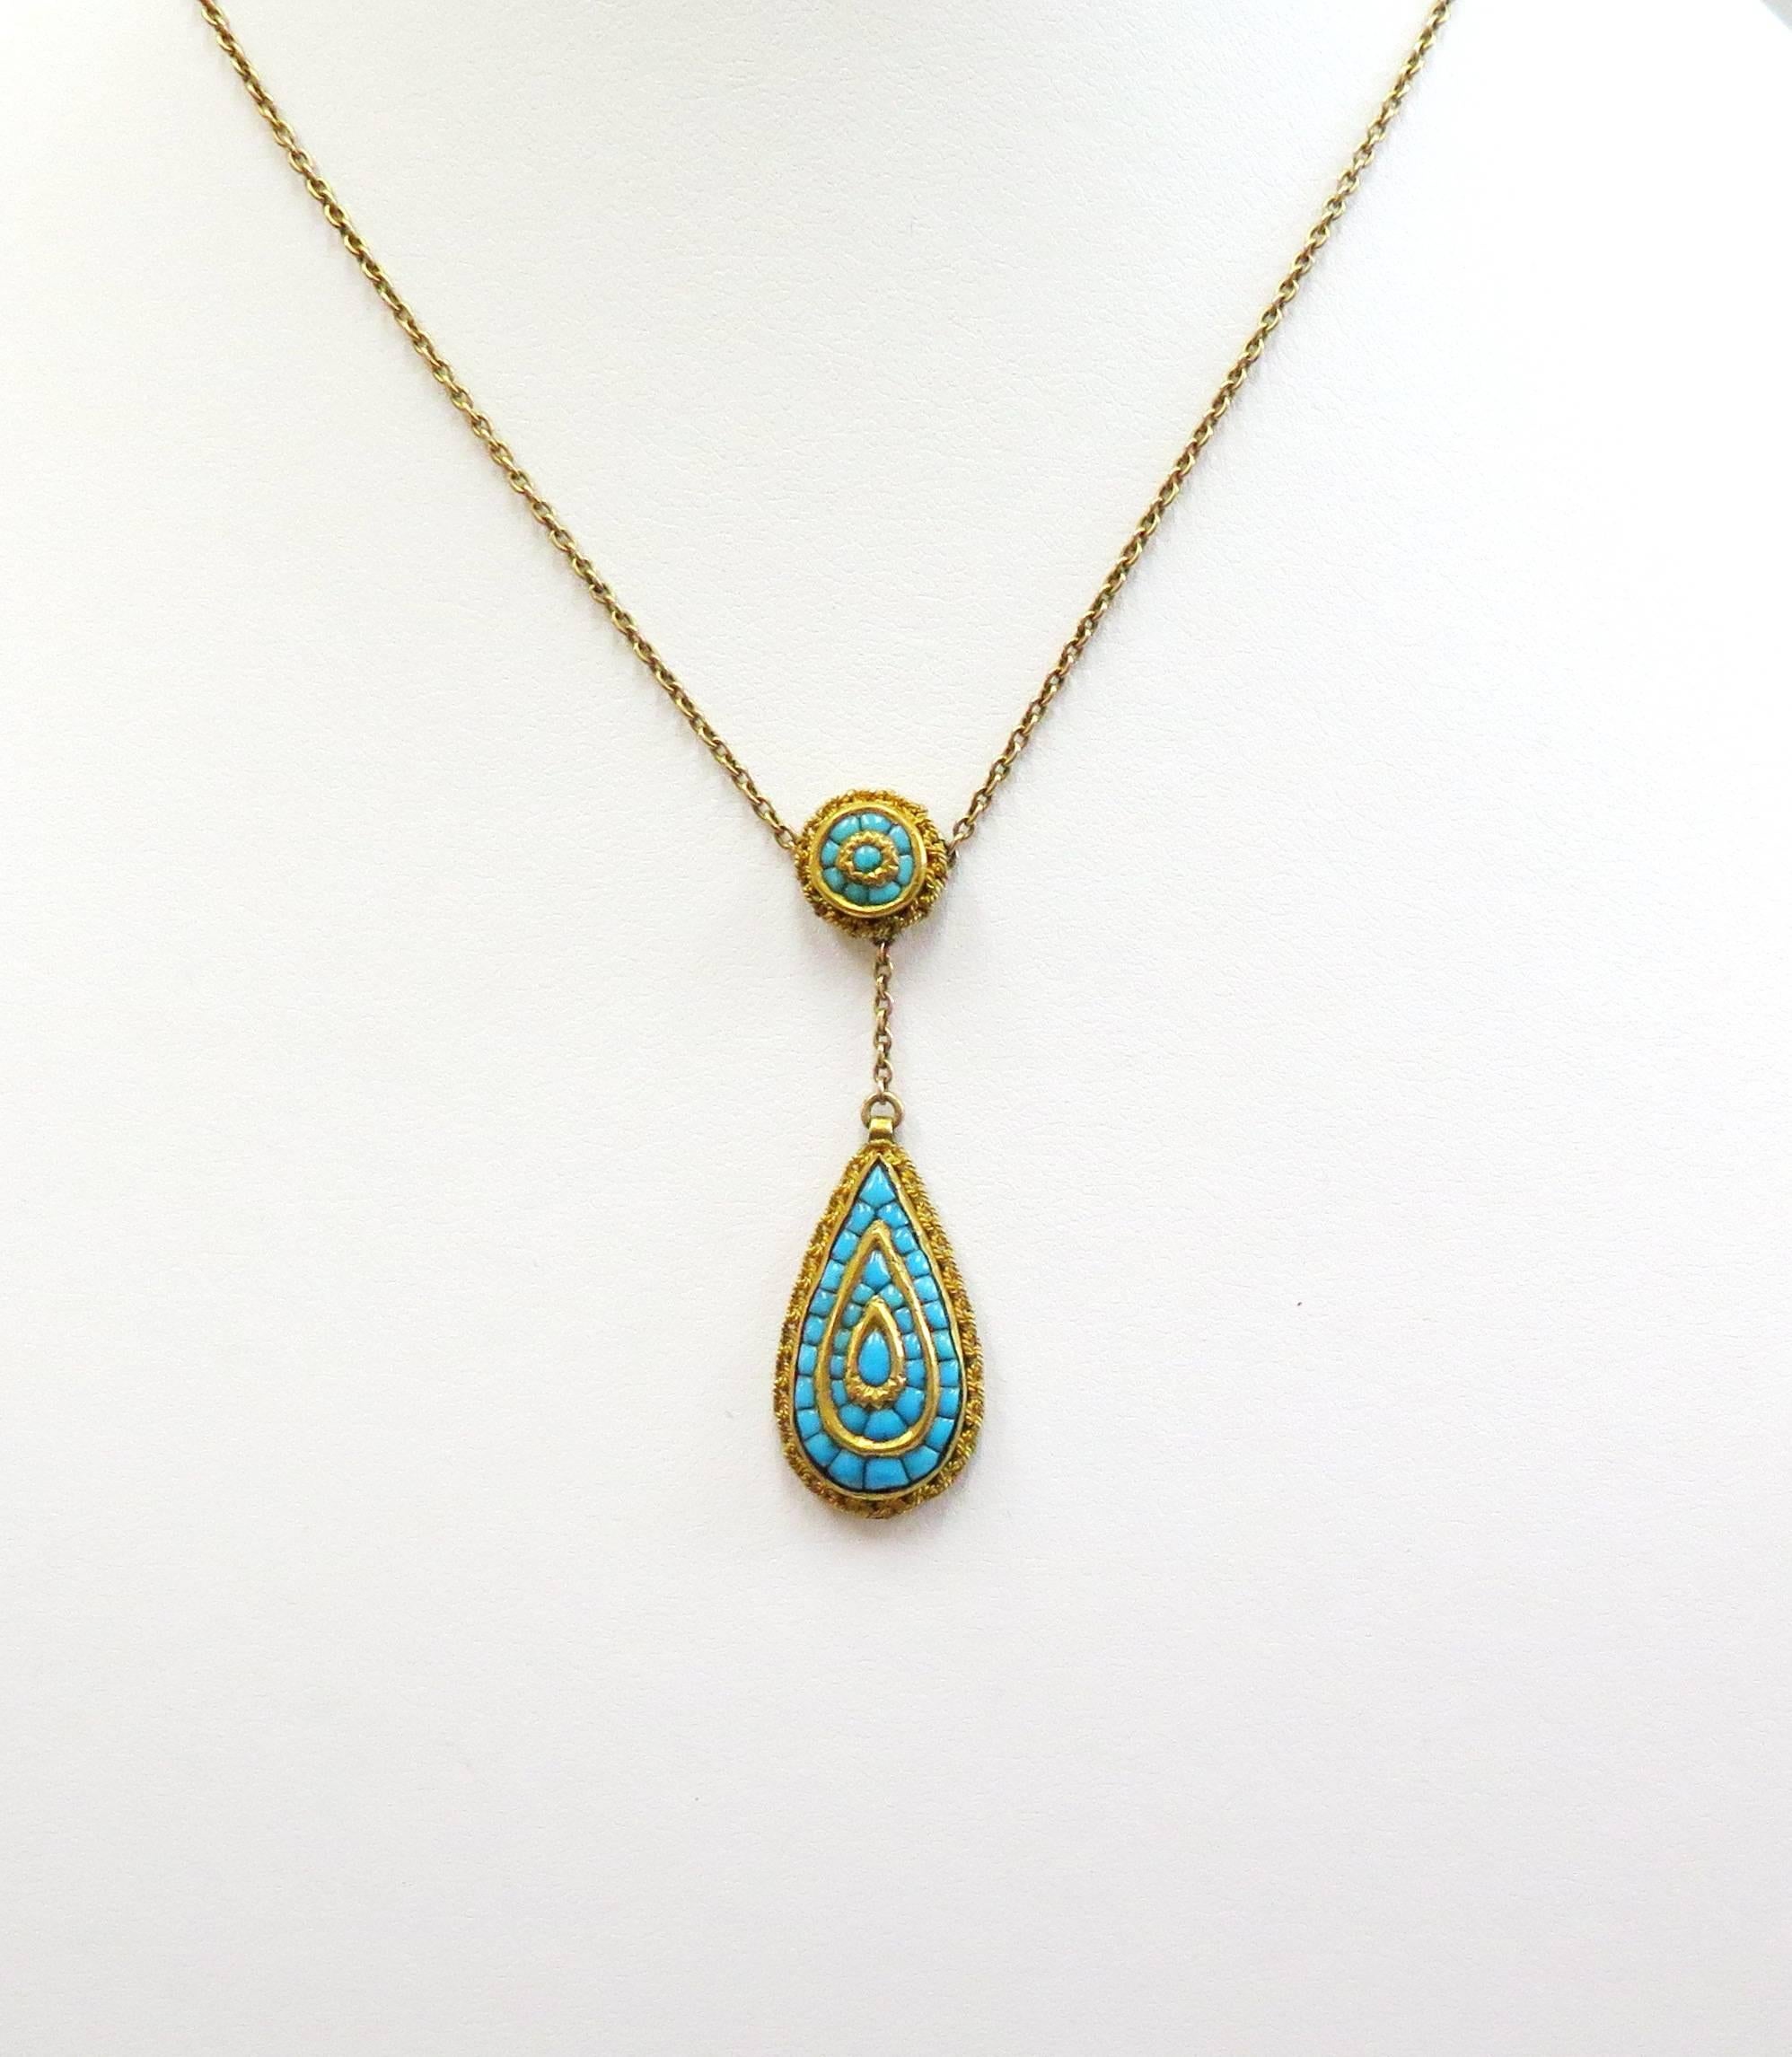 Round Cut Victorian Persian Turquoise Necklace, 14 Karat Yellow Gold